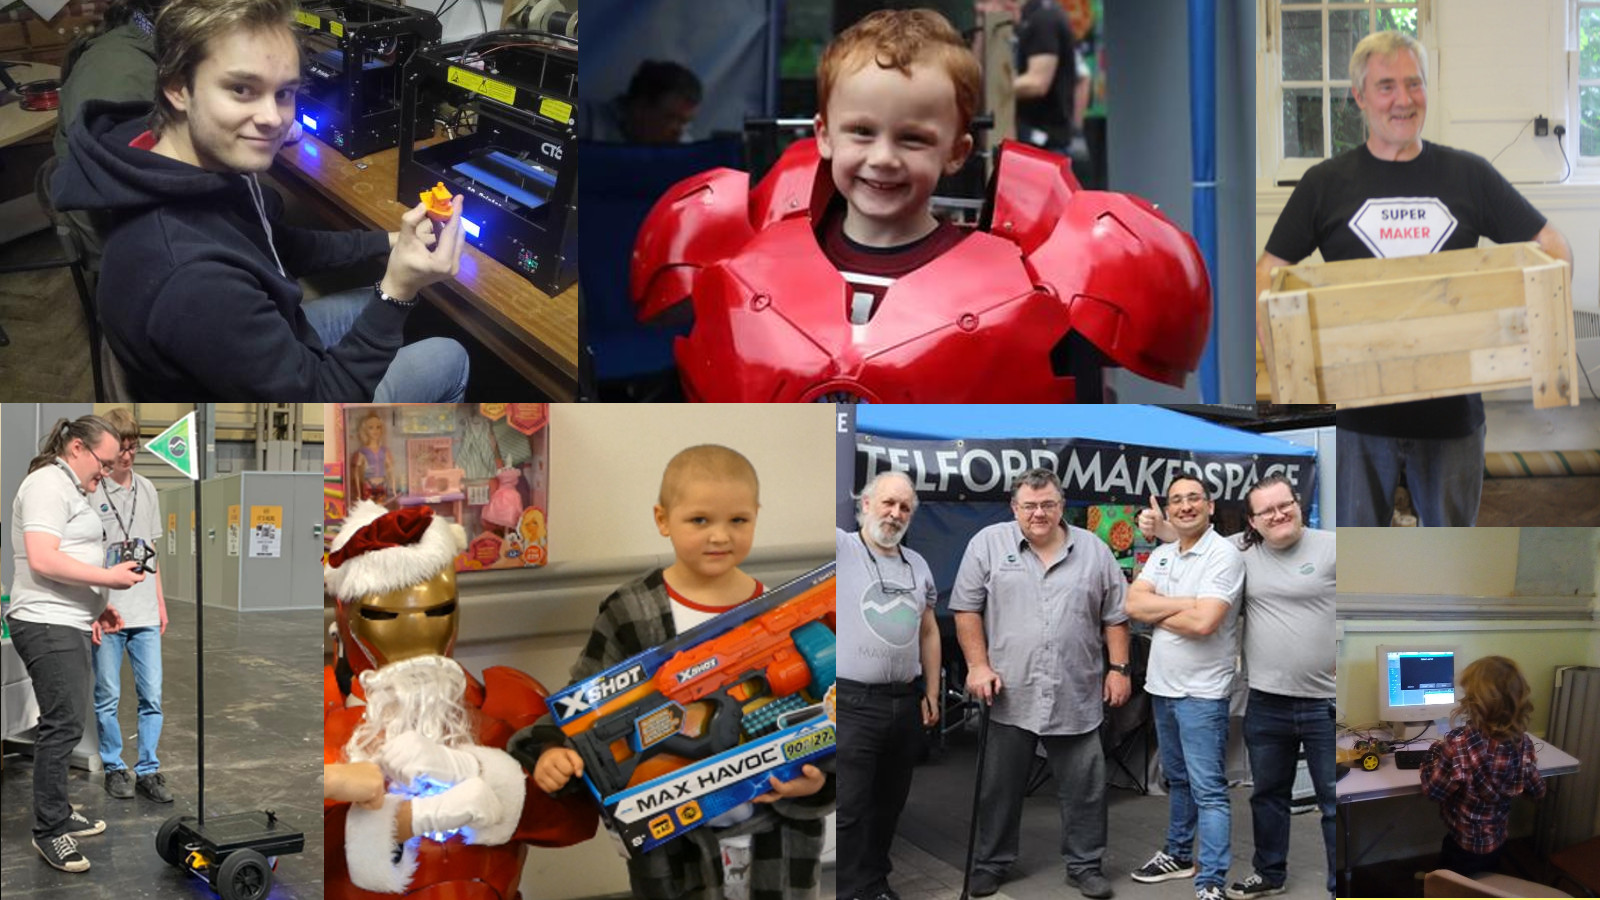 Collage of pictures of Telford Makerspace past events